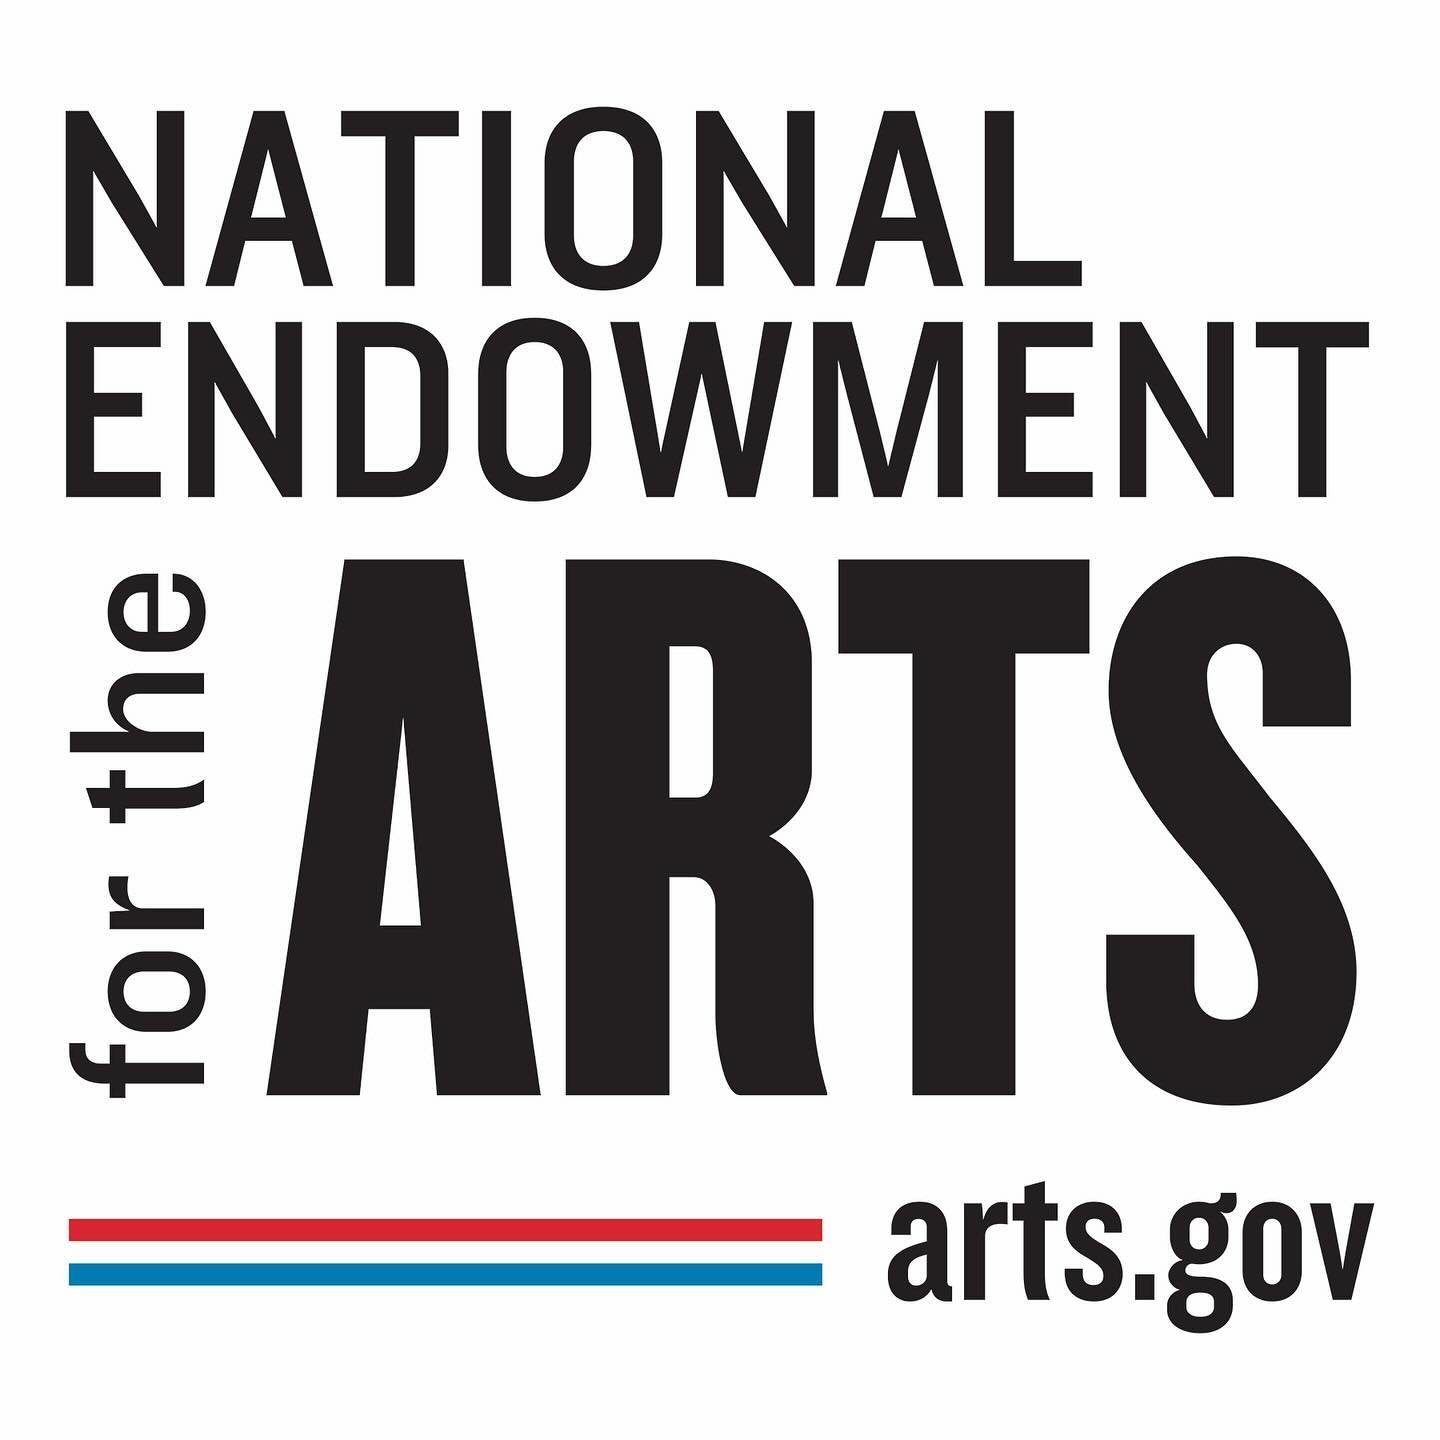 🎭 We got the grant! IAMA Theatre Company has been approved by the National Endowment for the Arts (NEA) for a Grants for Arts Projects award of $20,000. This grant will allow us to expand IAMA&rsquo;s New Works Fest this winter to include 8 new play